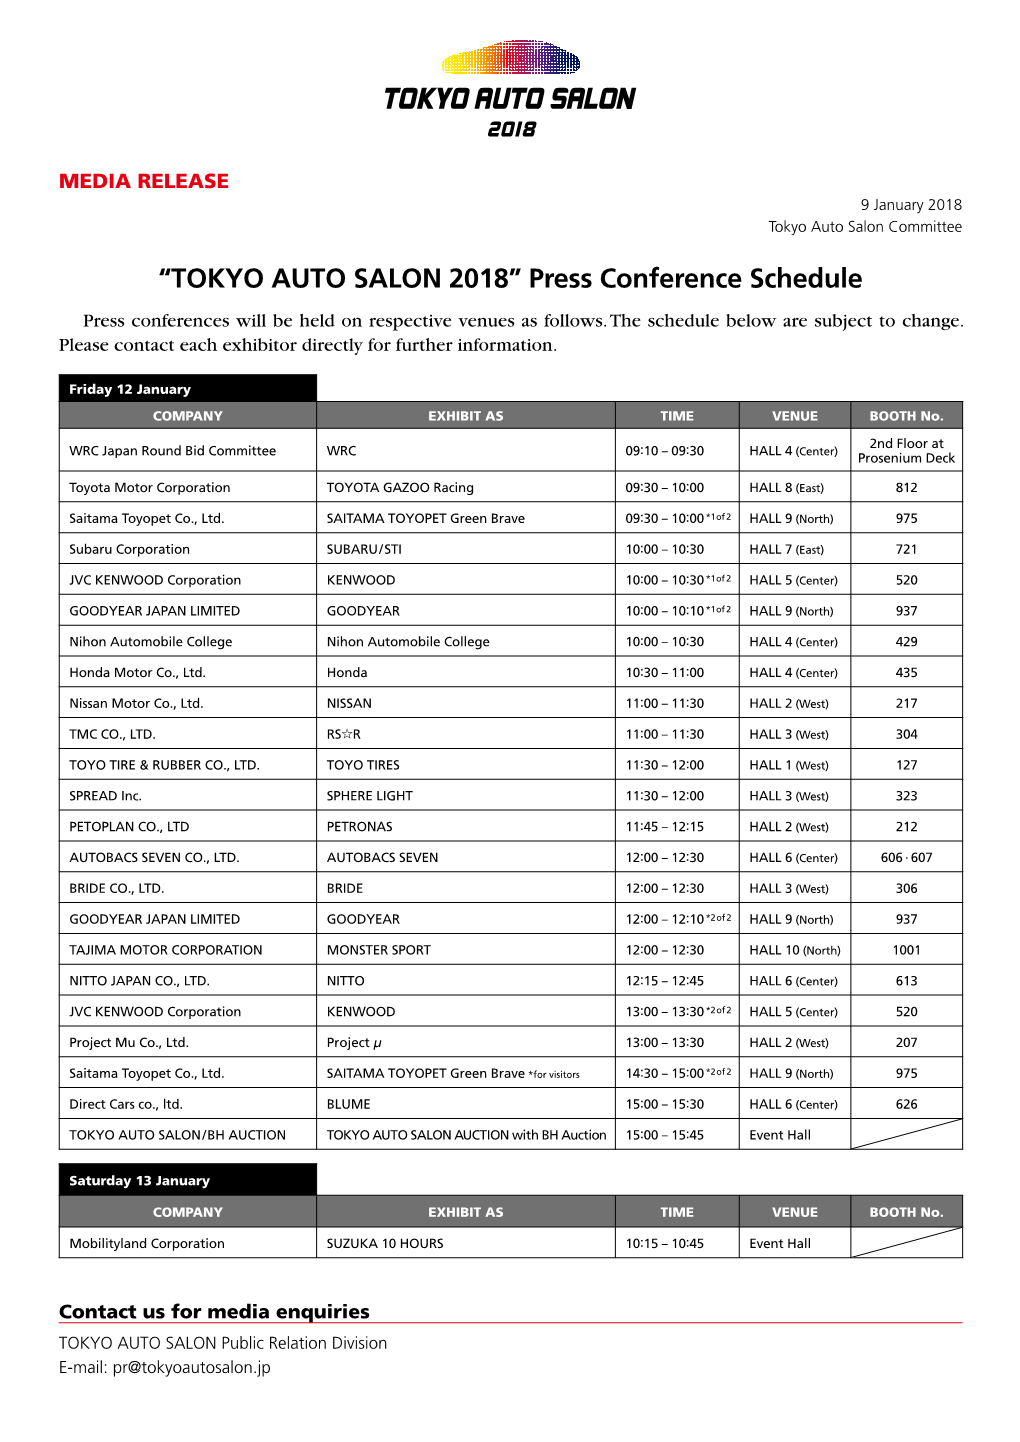 “TOKYO AUTO SALON 2018” Press Conference Schedule Press Conferences Will Be Held on Respective Venues As Follows